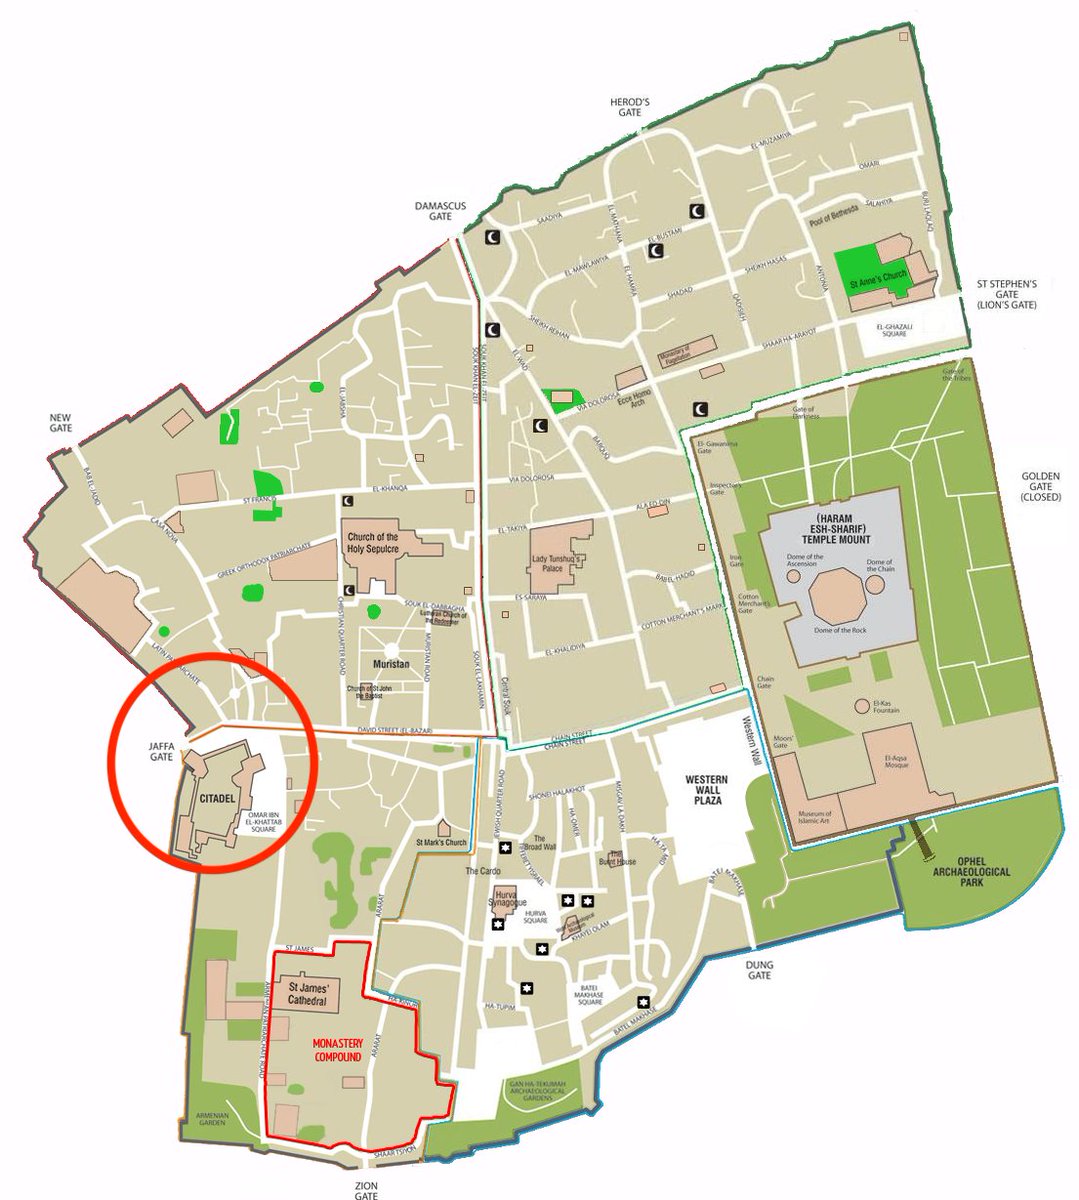 For orientation, here's a map of the Old City of Jerusalem (via Wikimedia Commons), with the area we're looking at -- the west entrance to the Old City -- circled in red and in detail on the right. https://commons.wikimedia.org/wiki/File:Map_of_Jerusalem_-_the_old_city_-_EN.png~mp